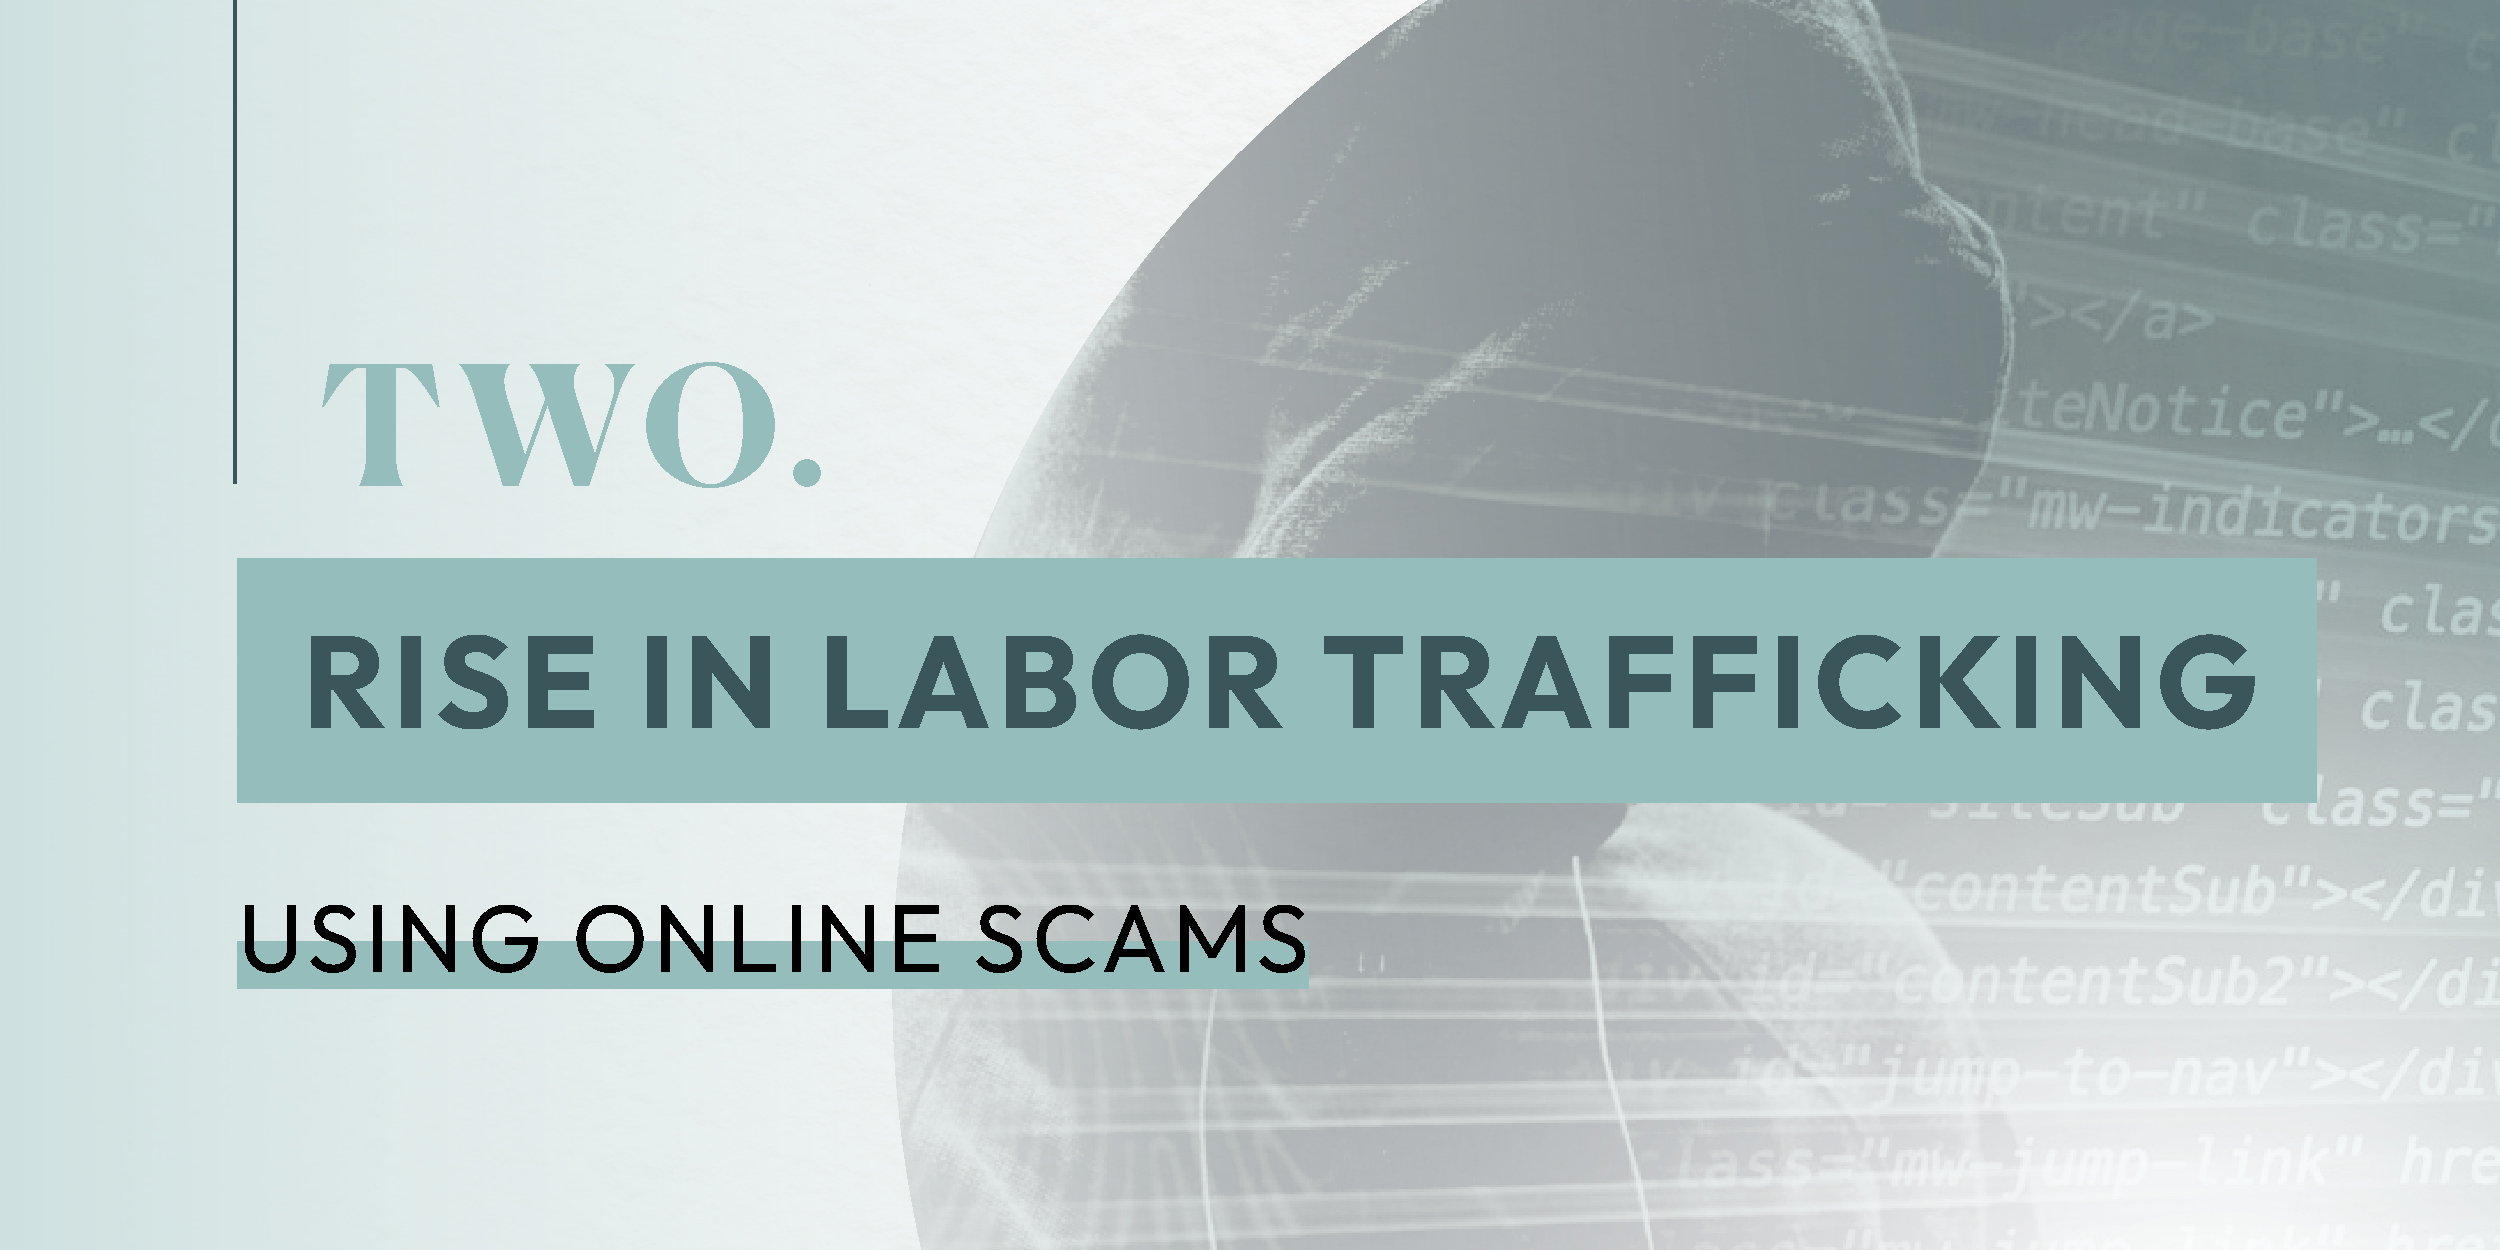 Takeaway Two: Rise in Labor Trafficking Using Online Scams